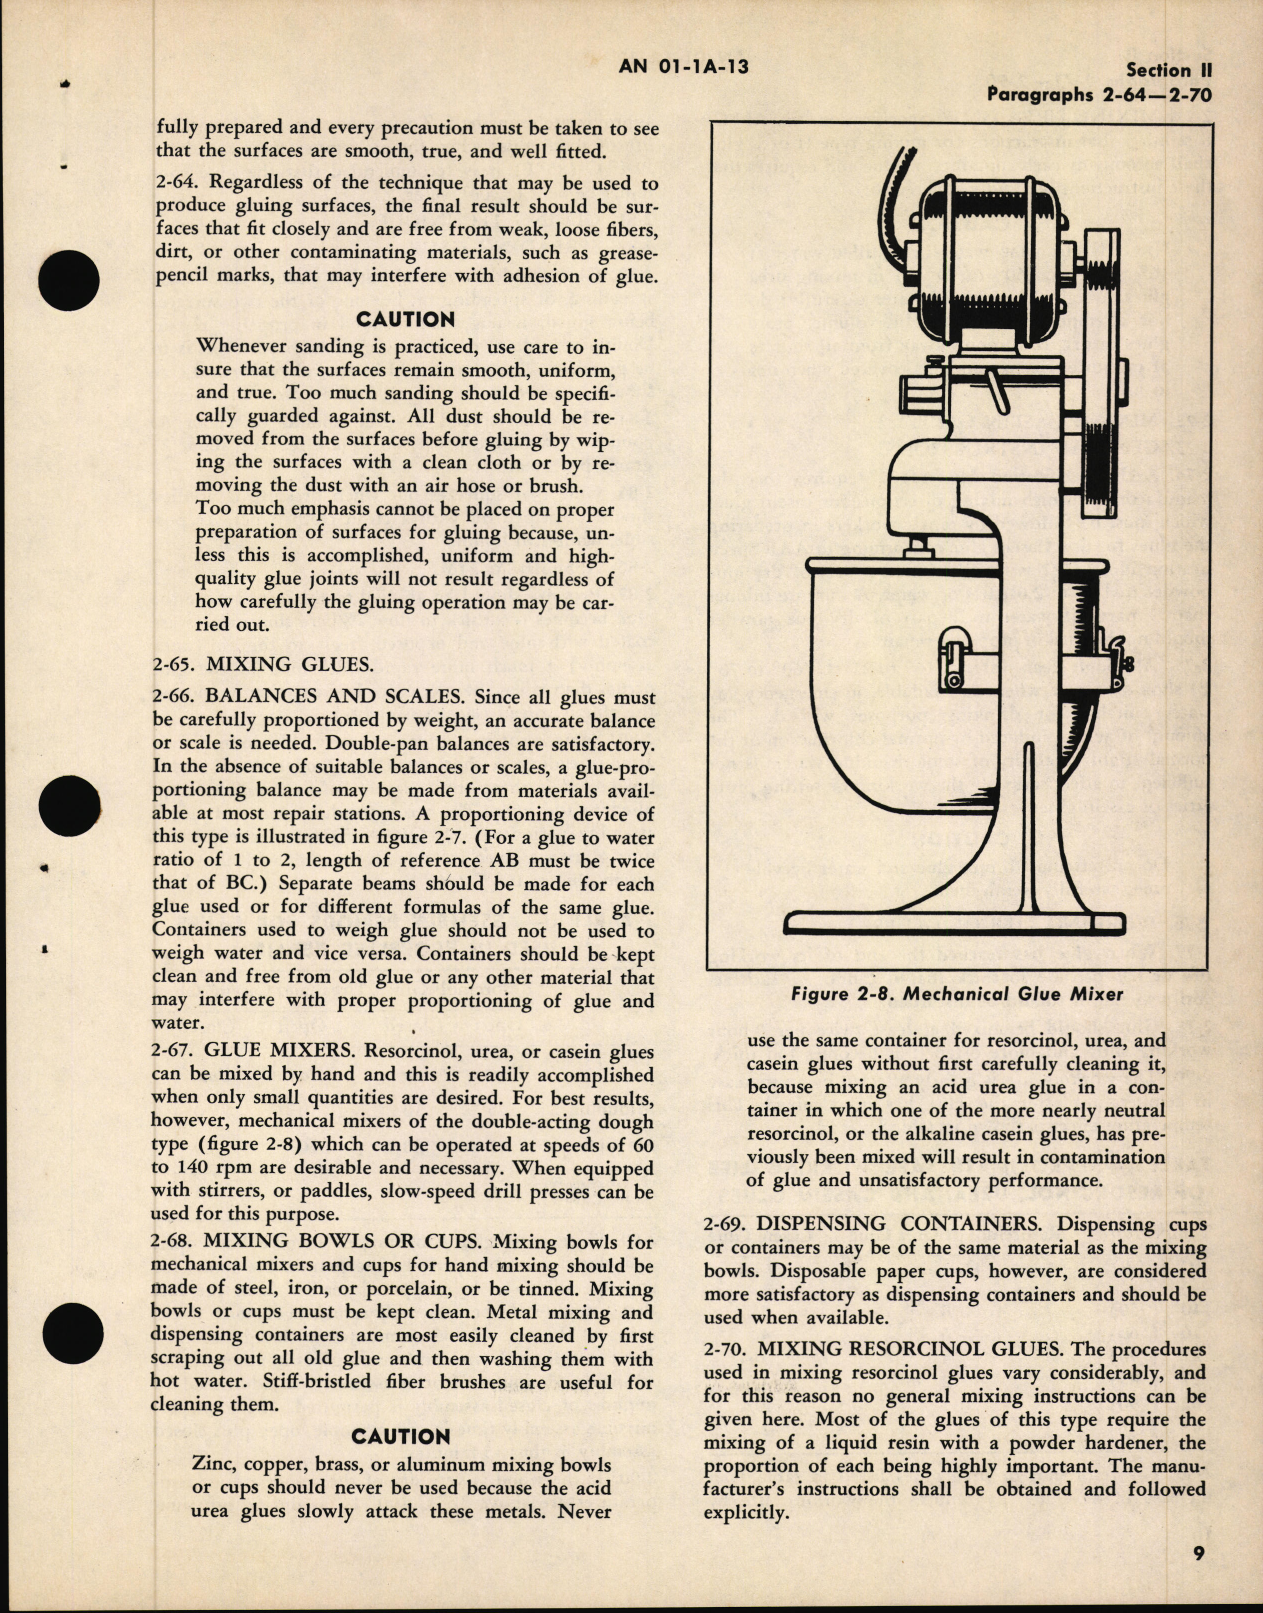 Sample page 15 from AirCorps Library document: Repair of Wood Propellers and Test Clubs